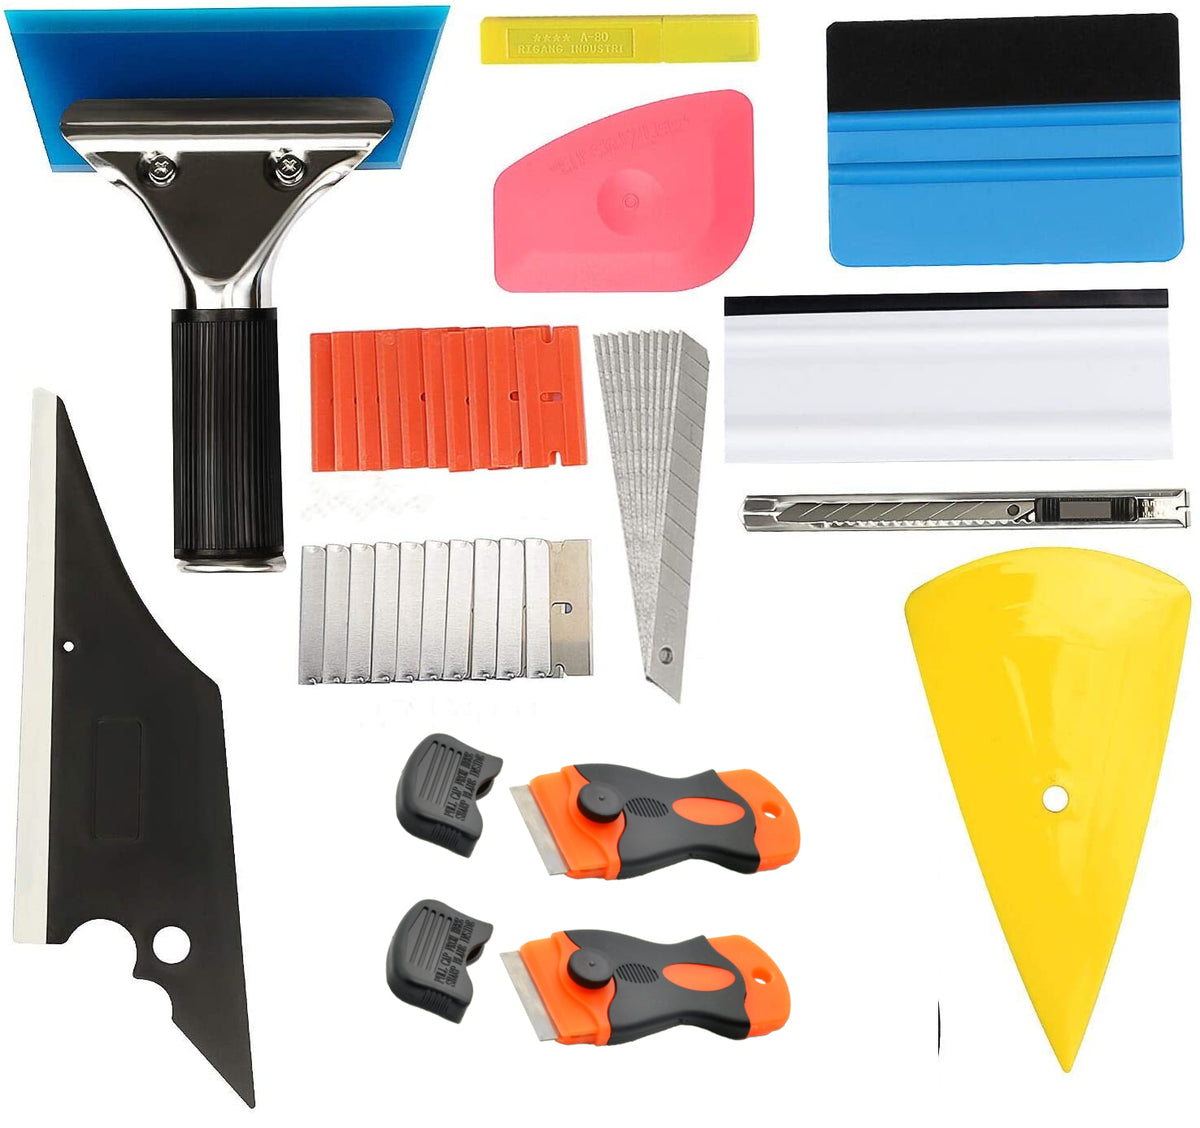 VVNIAA Window Tinting Tools, Window Film Kit, Professional Car Wrap Kit,  Vinyl Wrap Kit, Tint Kit Includes Square with Flannel Squeegee, Carving